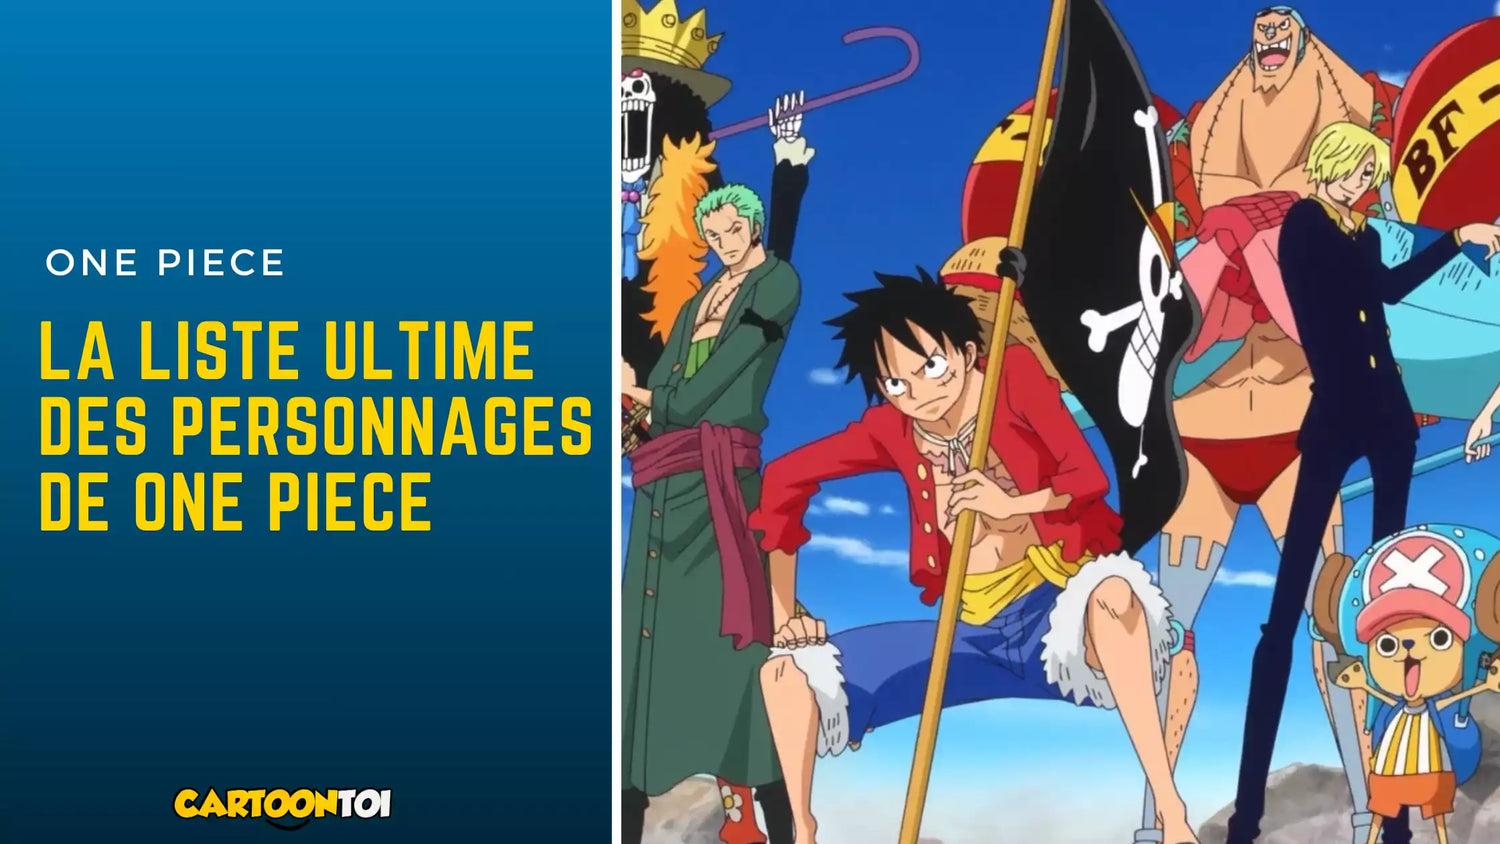 List of One Piece characters